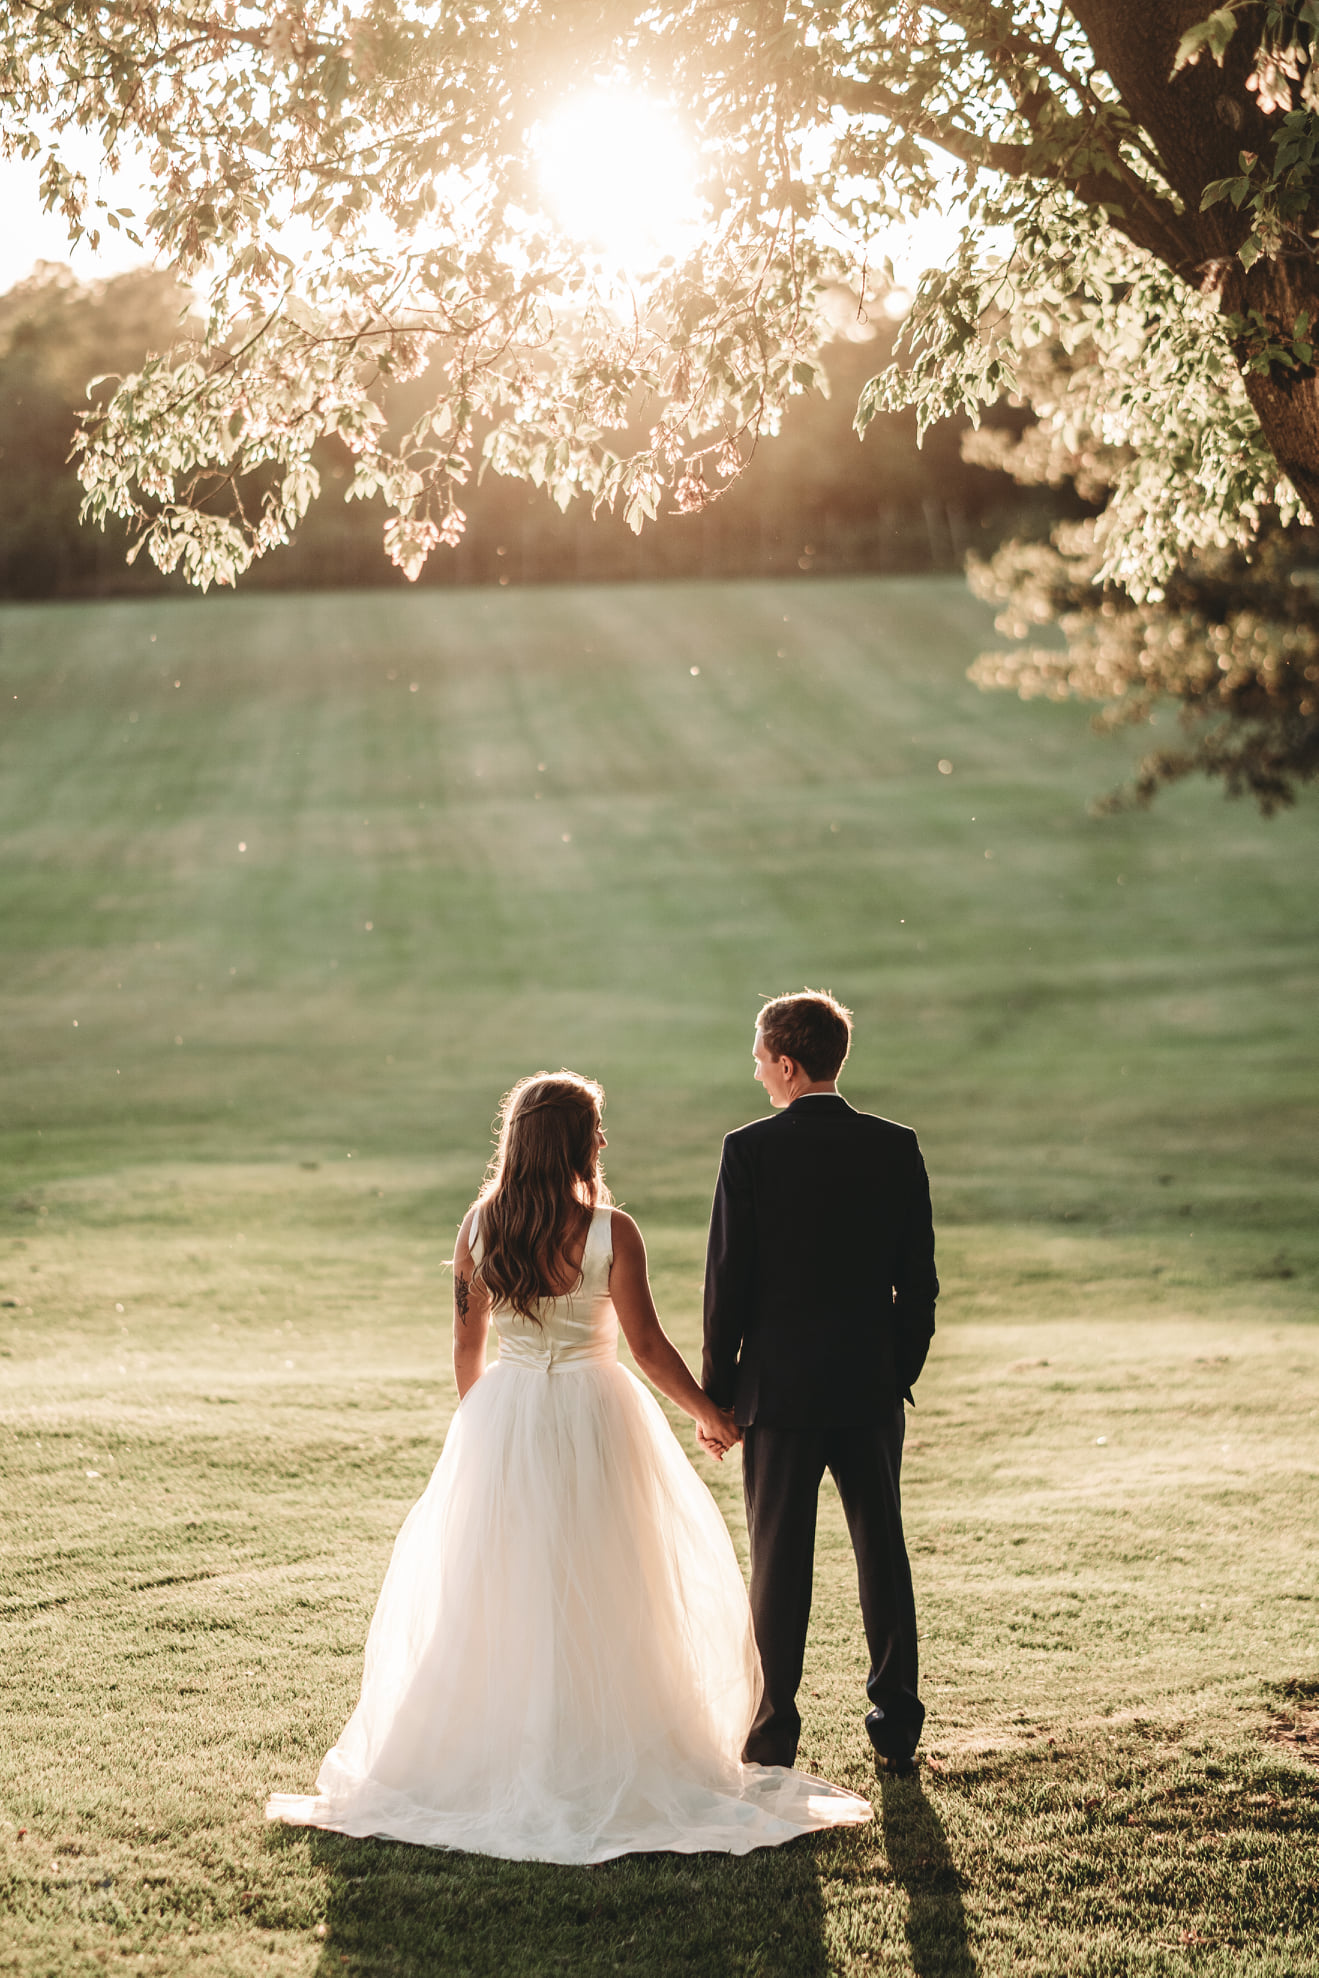 A wedding portrait of a bride and groom holding hands while standing under a tree 